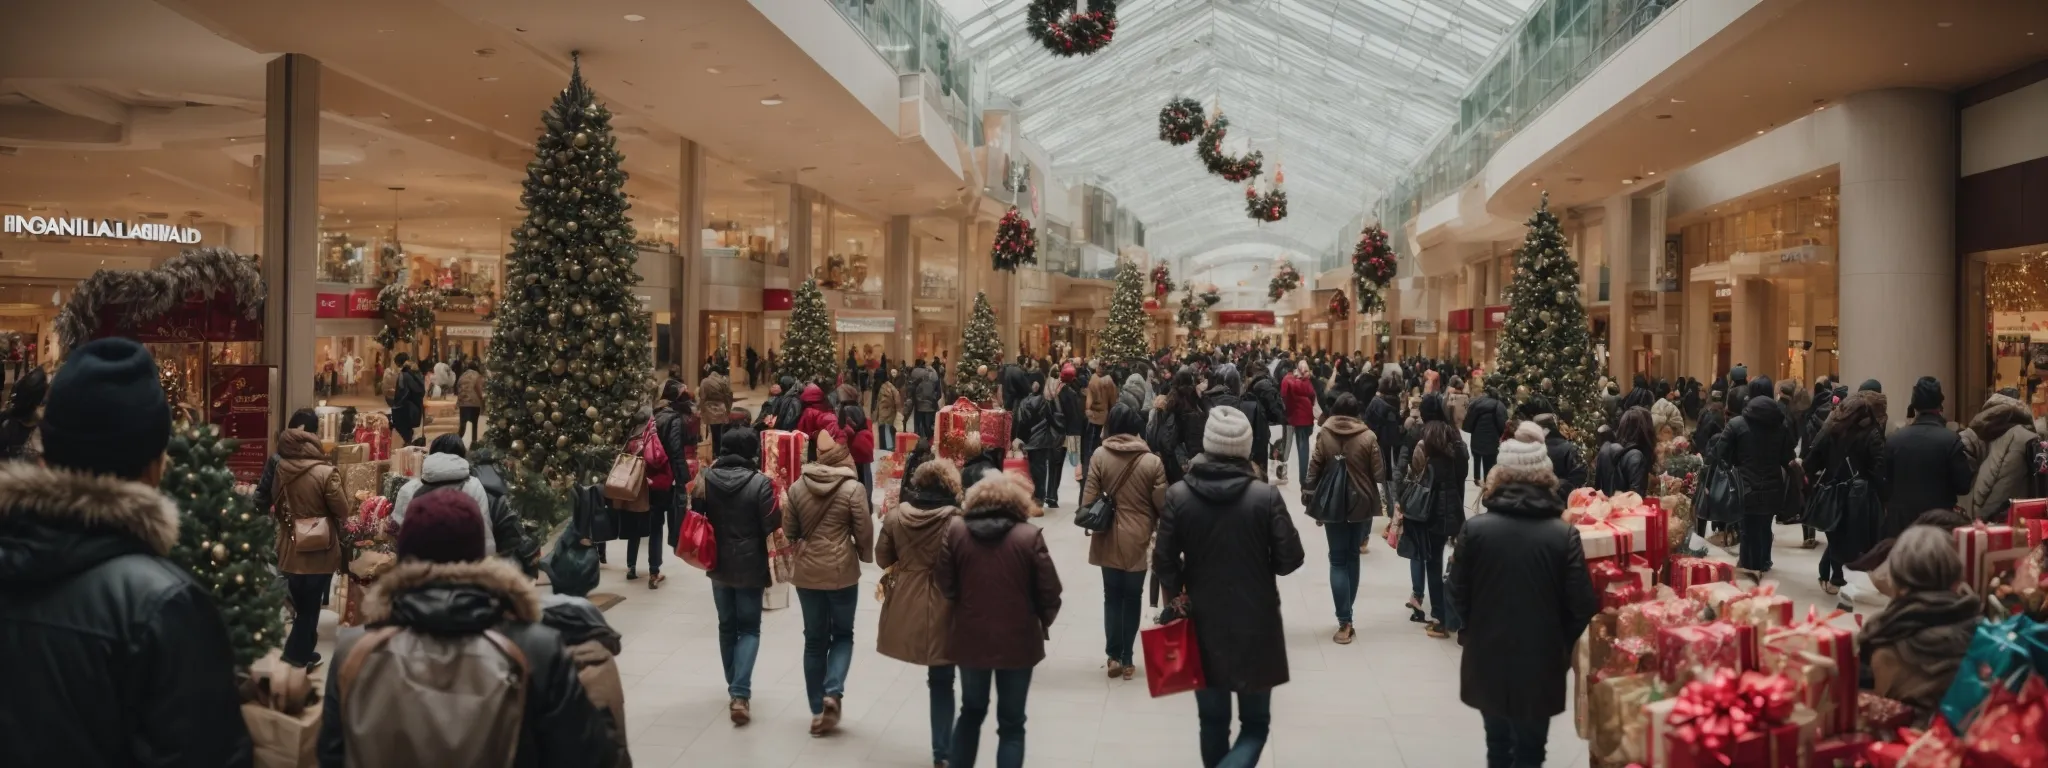 a bustling mall decked with holiday decorations and shoppers carrying bags filled with gifts.